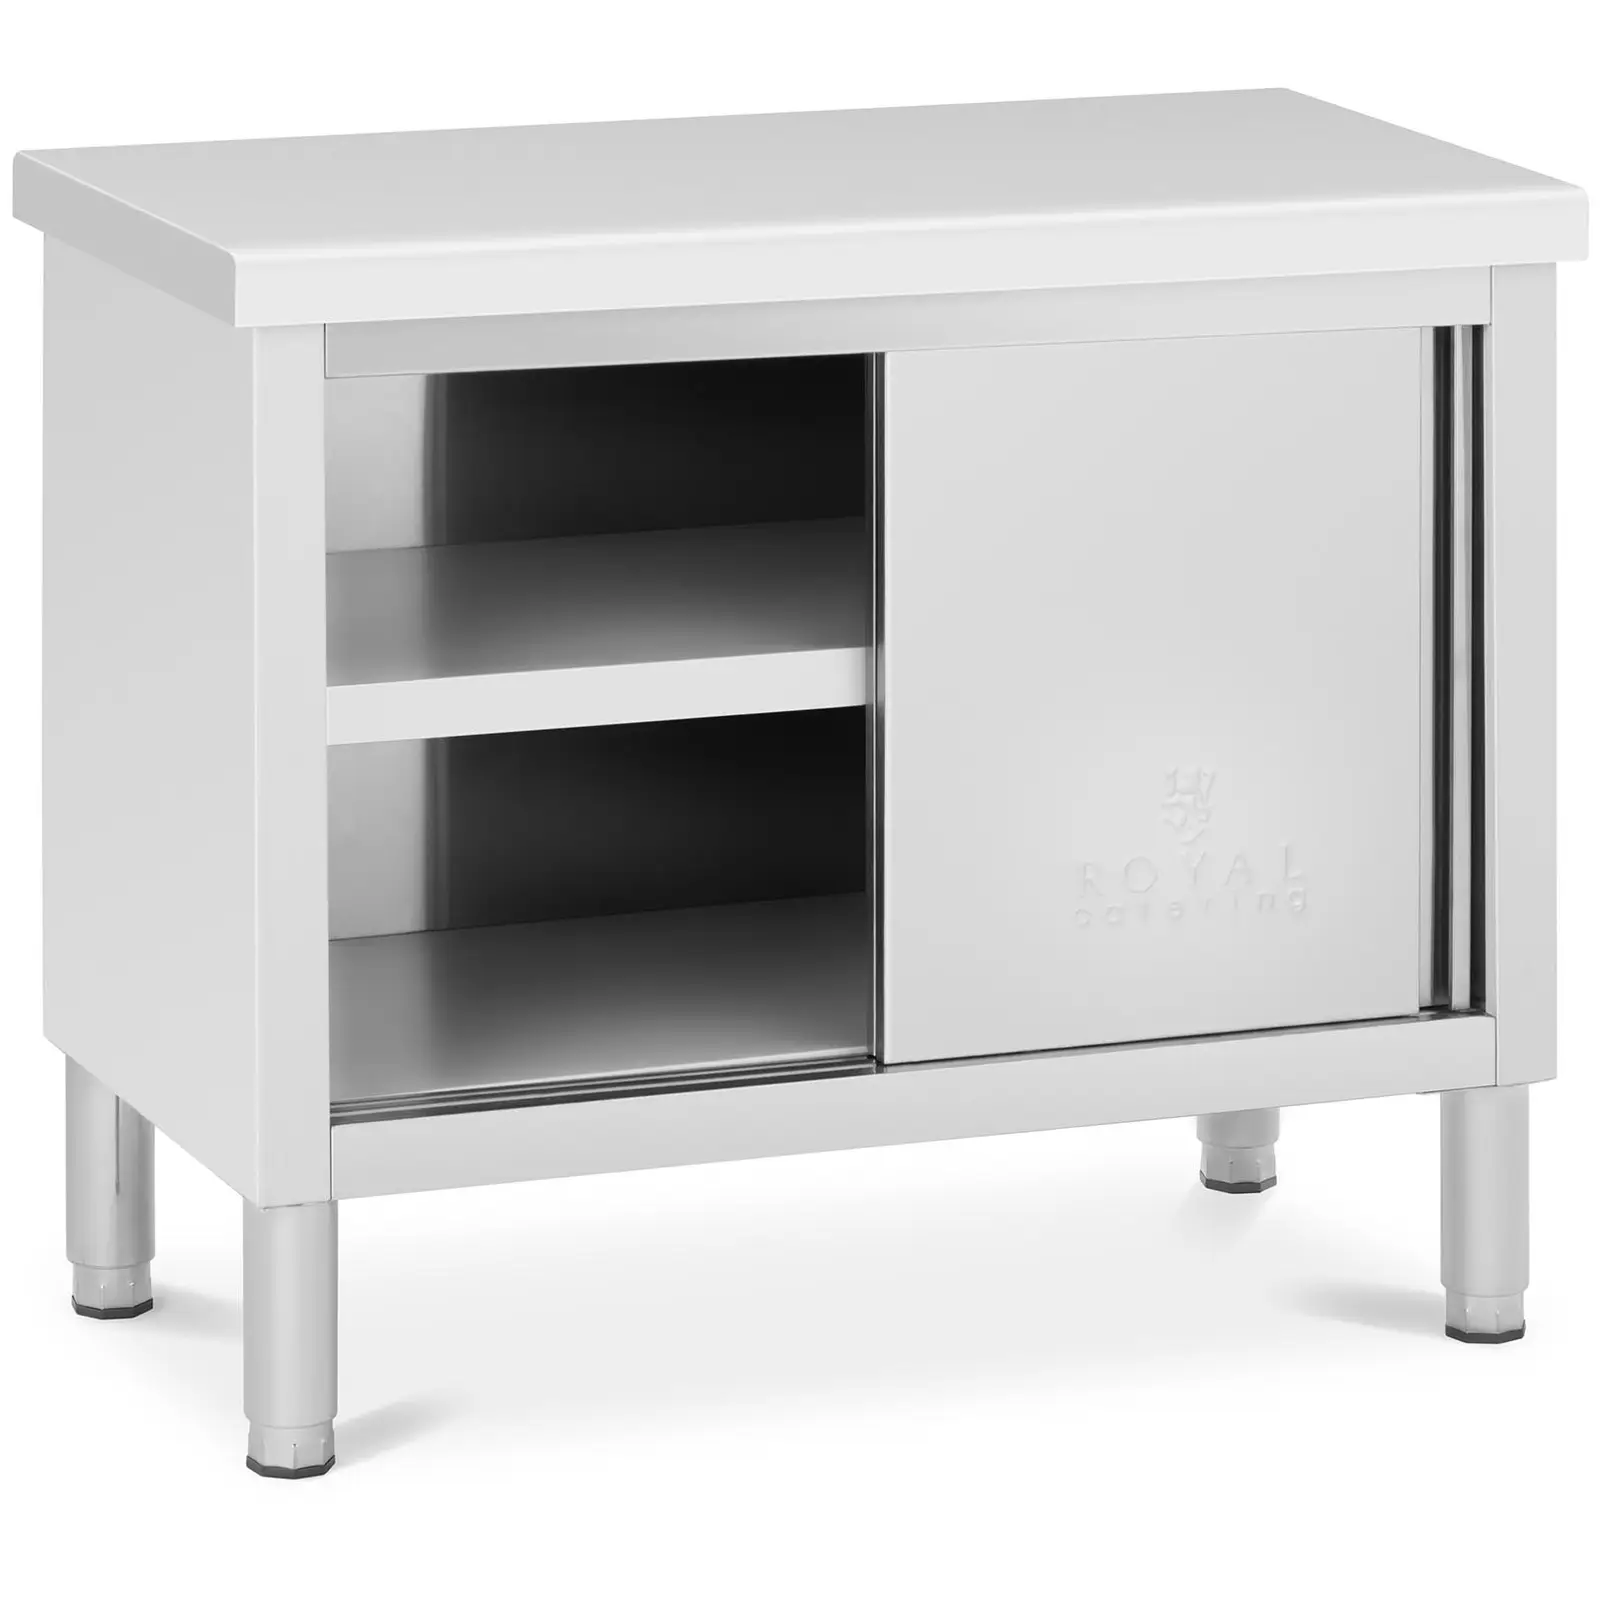 Stainless steel work cabinet - 100 x 50 cm - 330 kg capacity - Royal Catering